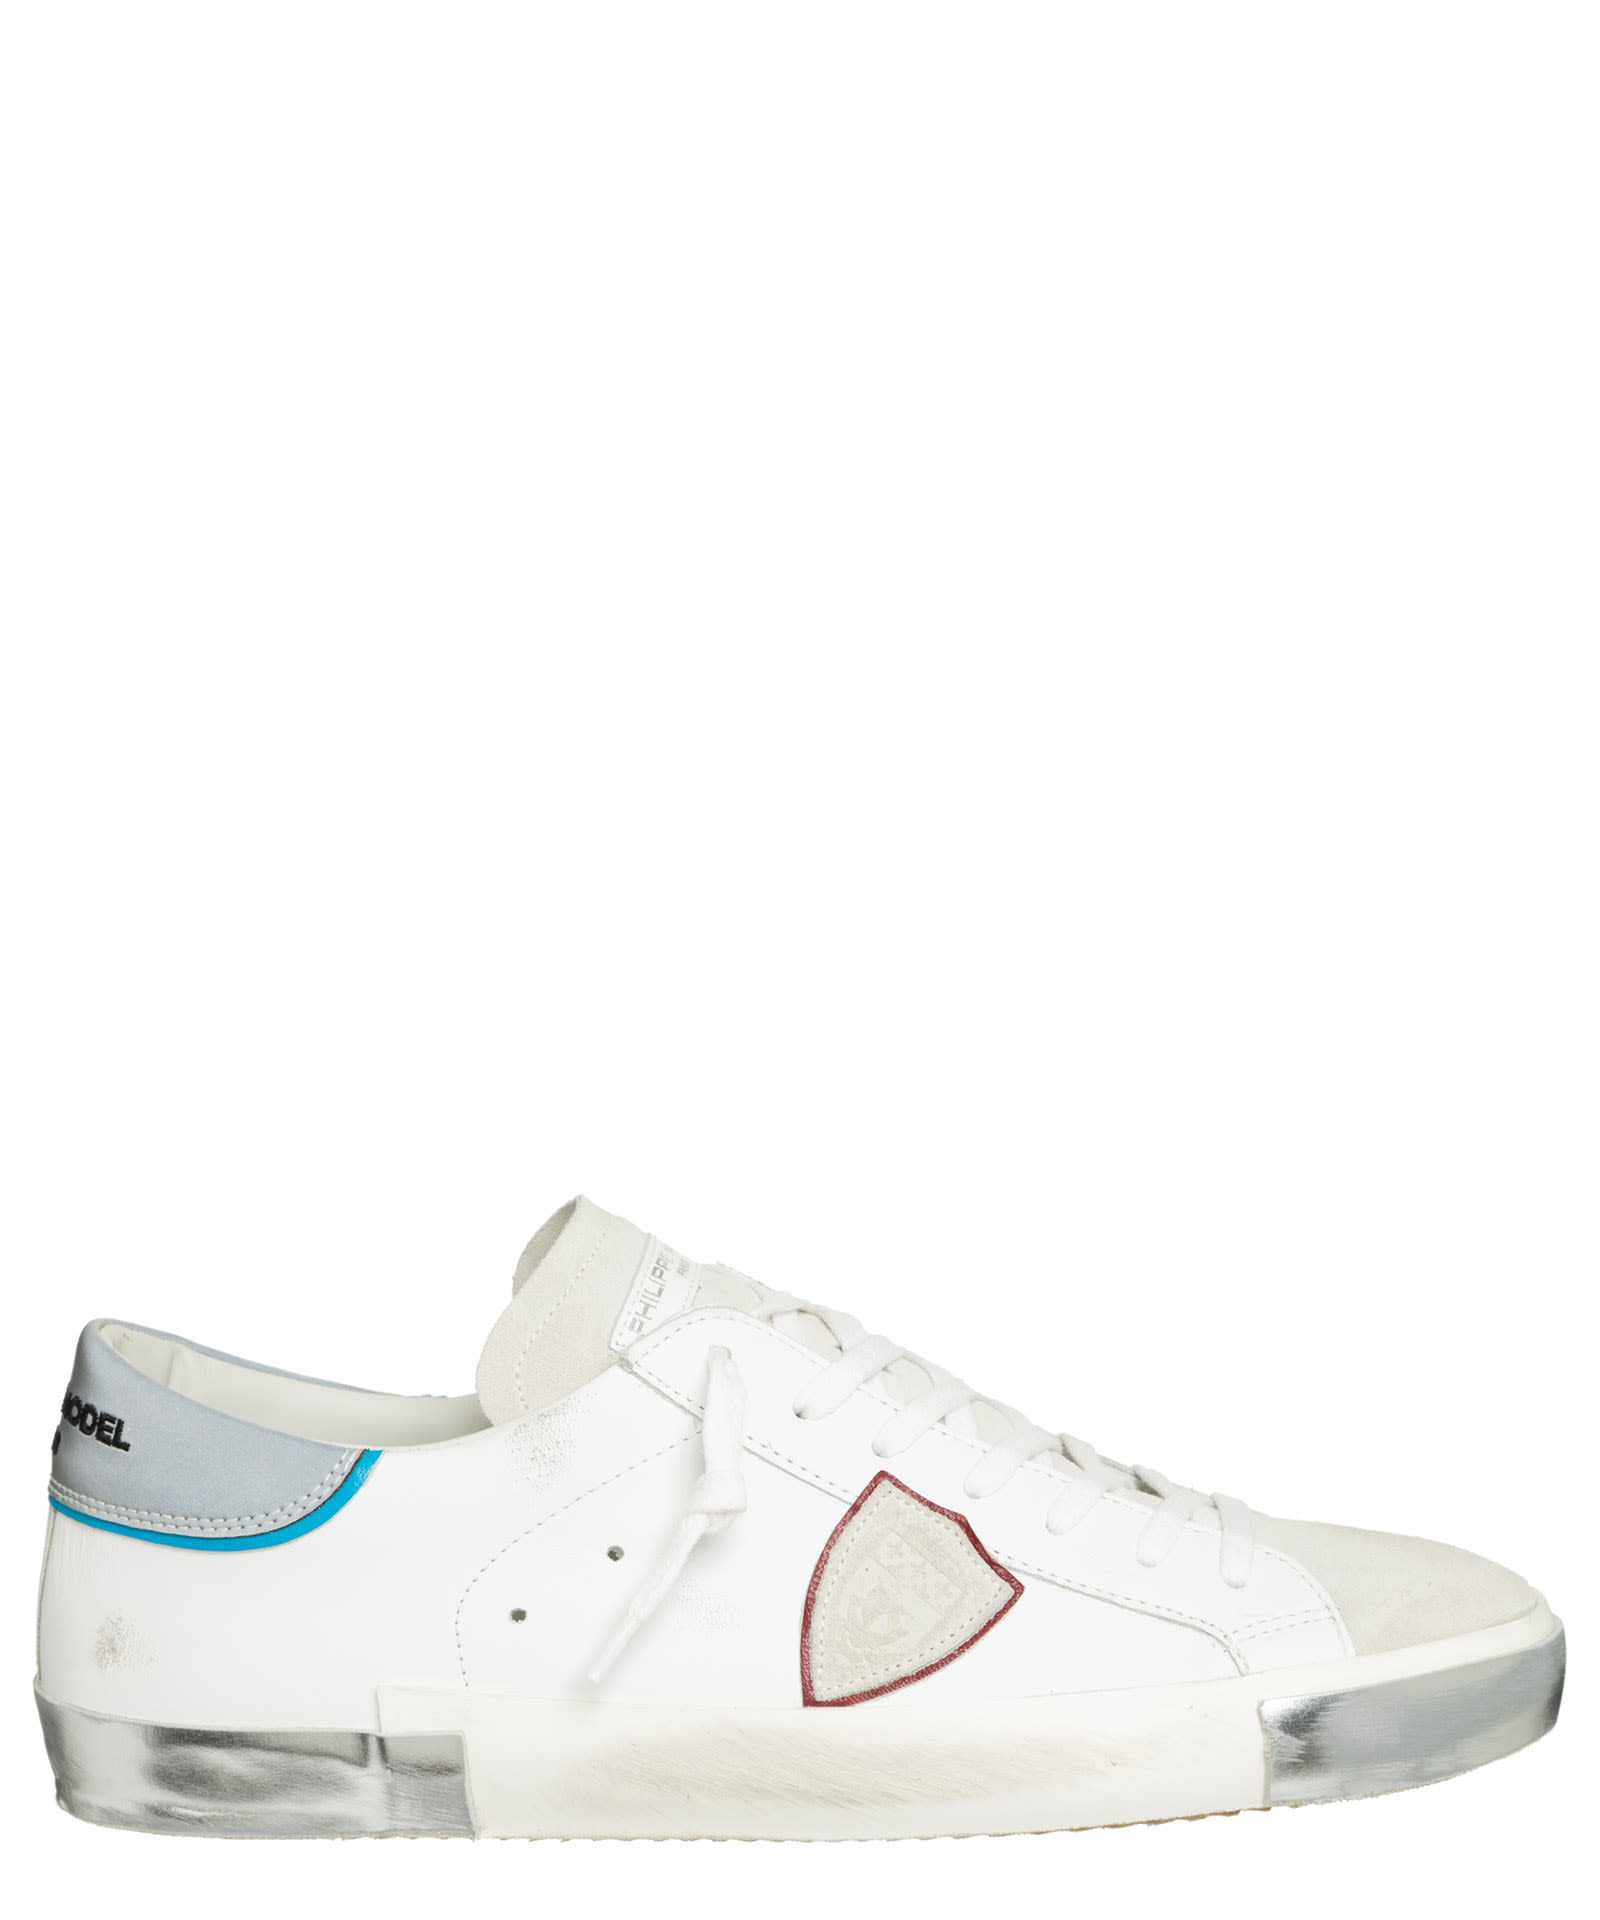 PHILIPPE MODEL PRSX LEATHER SNEAKERS